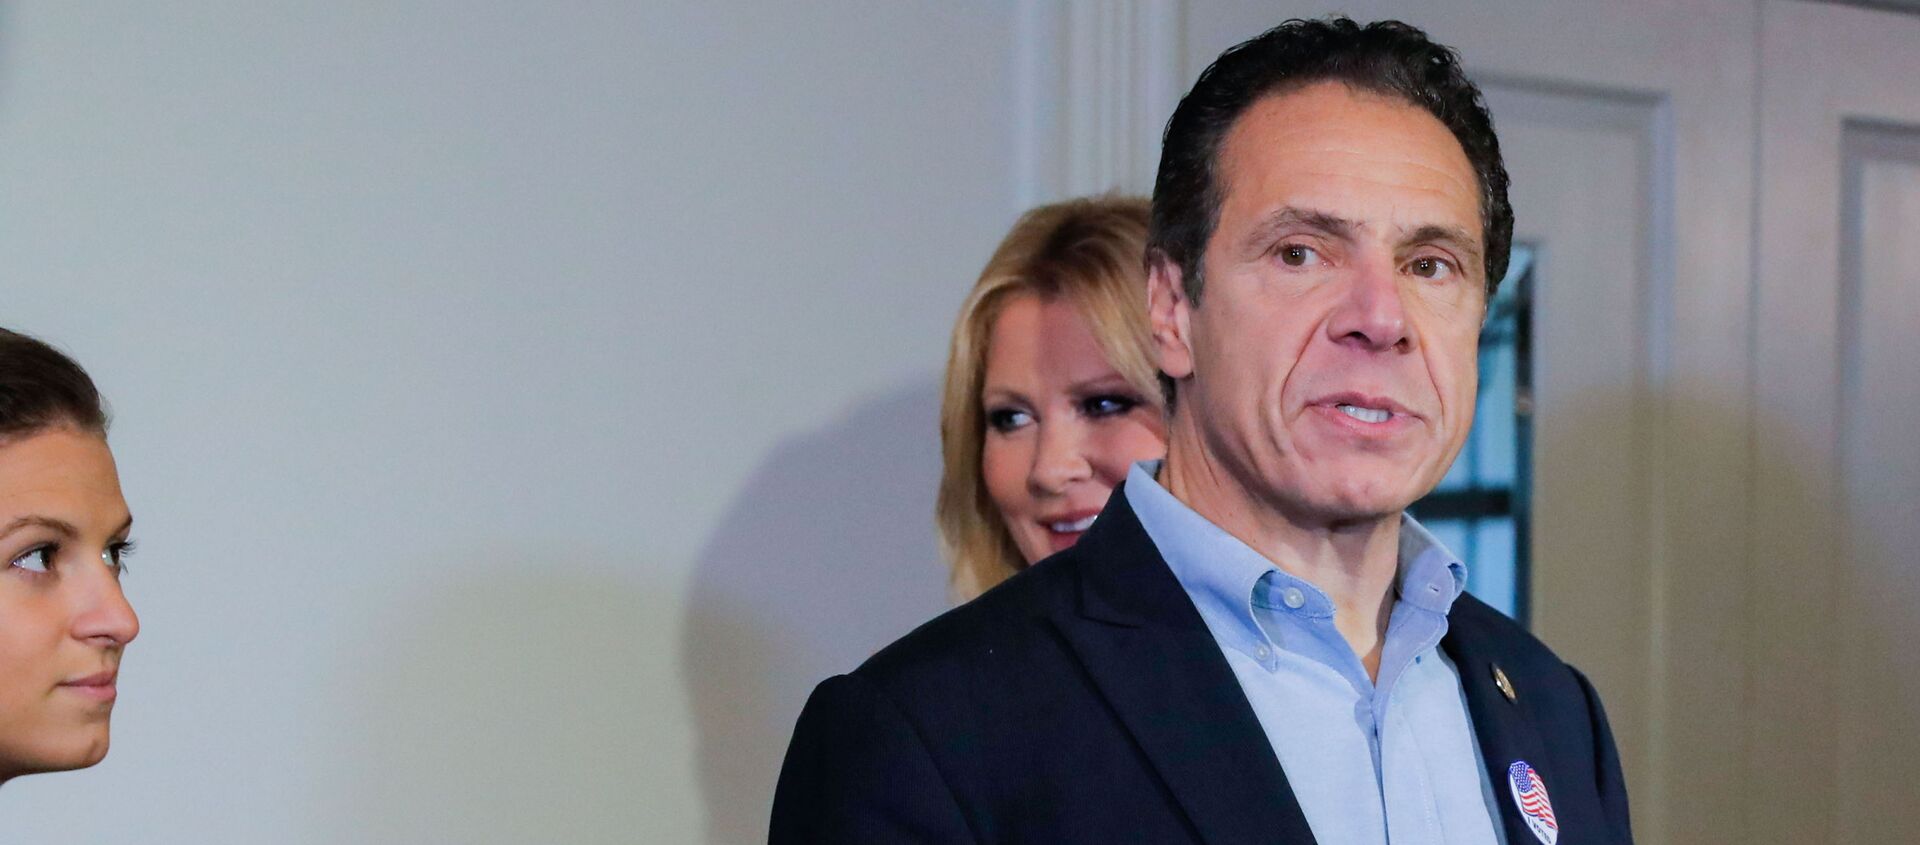 Democratic New York Governor Andrew Cuomo speaks at a news conference after voting in the midterm elections, standing with his daughter, Cara Kennedy Cuomo and girlfriend Sandra Lee, at Mt. Kisco, New York, 6 November 2018.  - Sputnik International, 1920, 29.03.2021